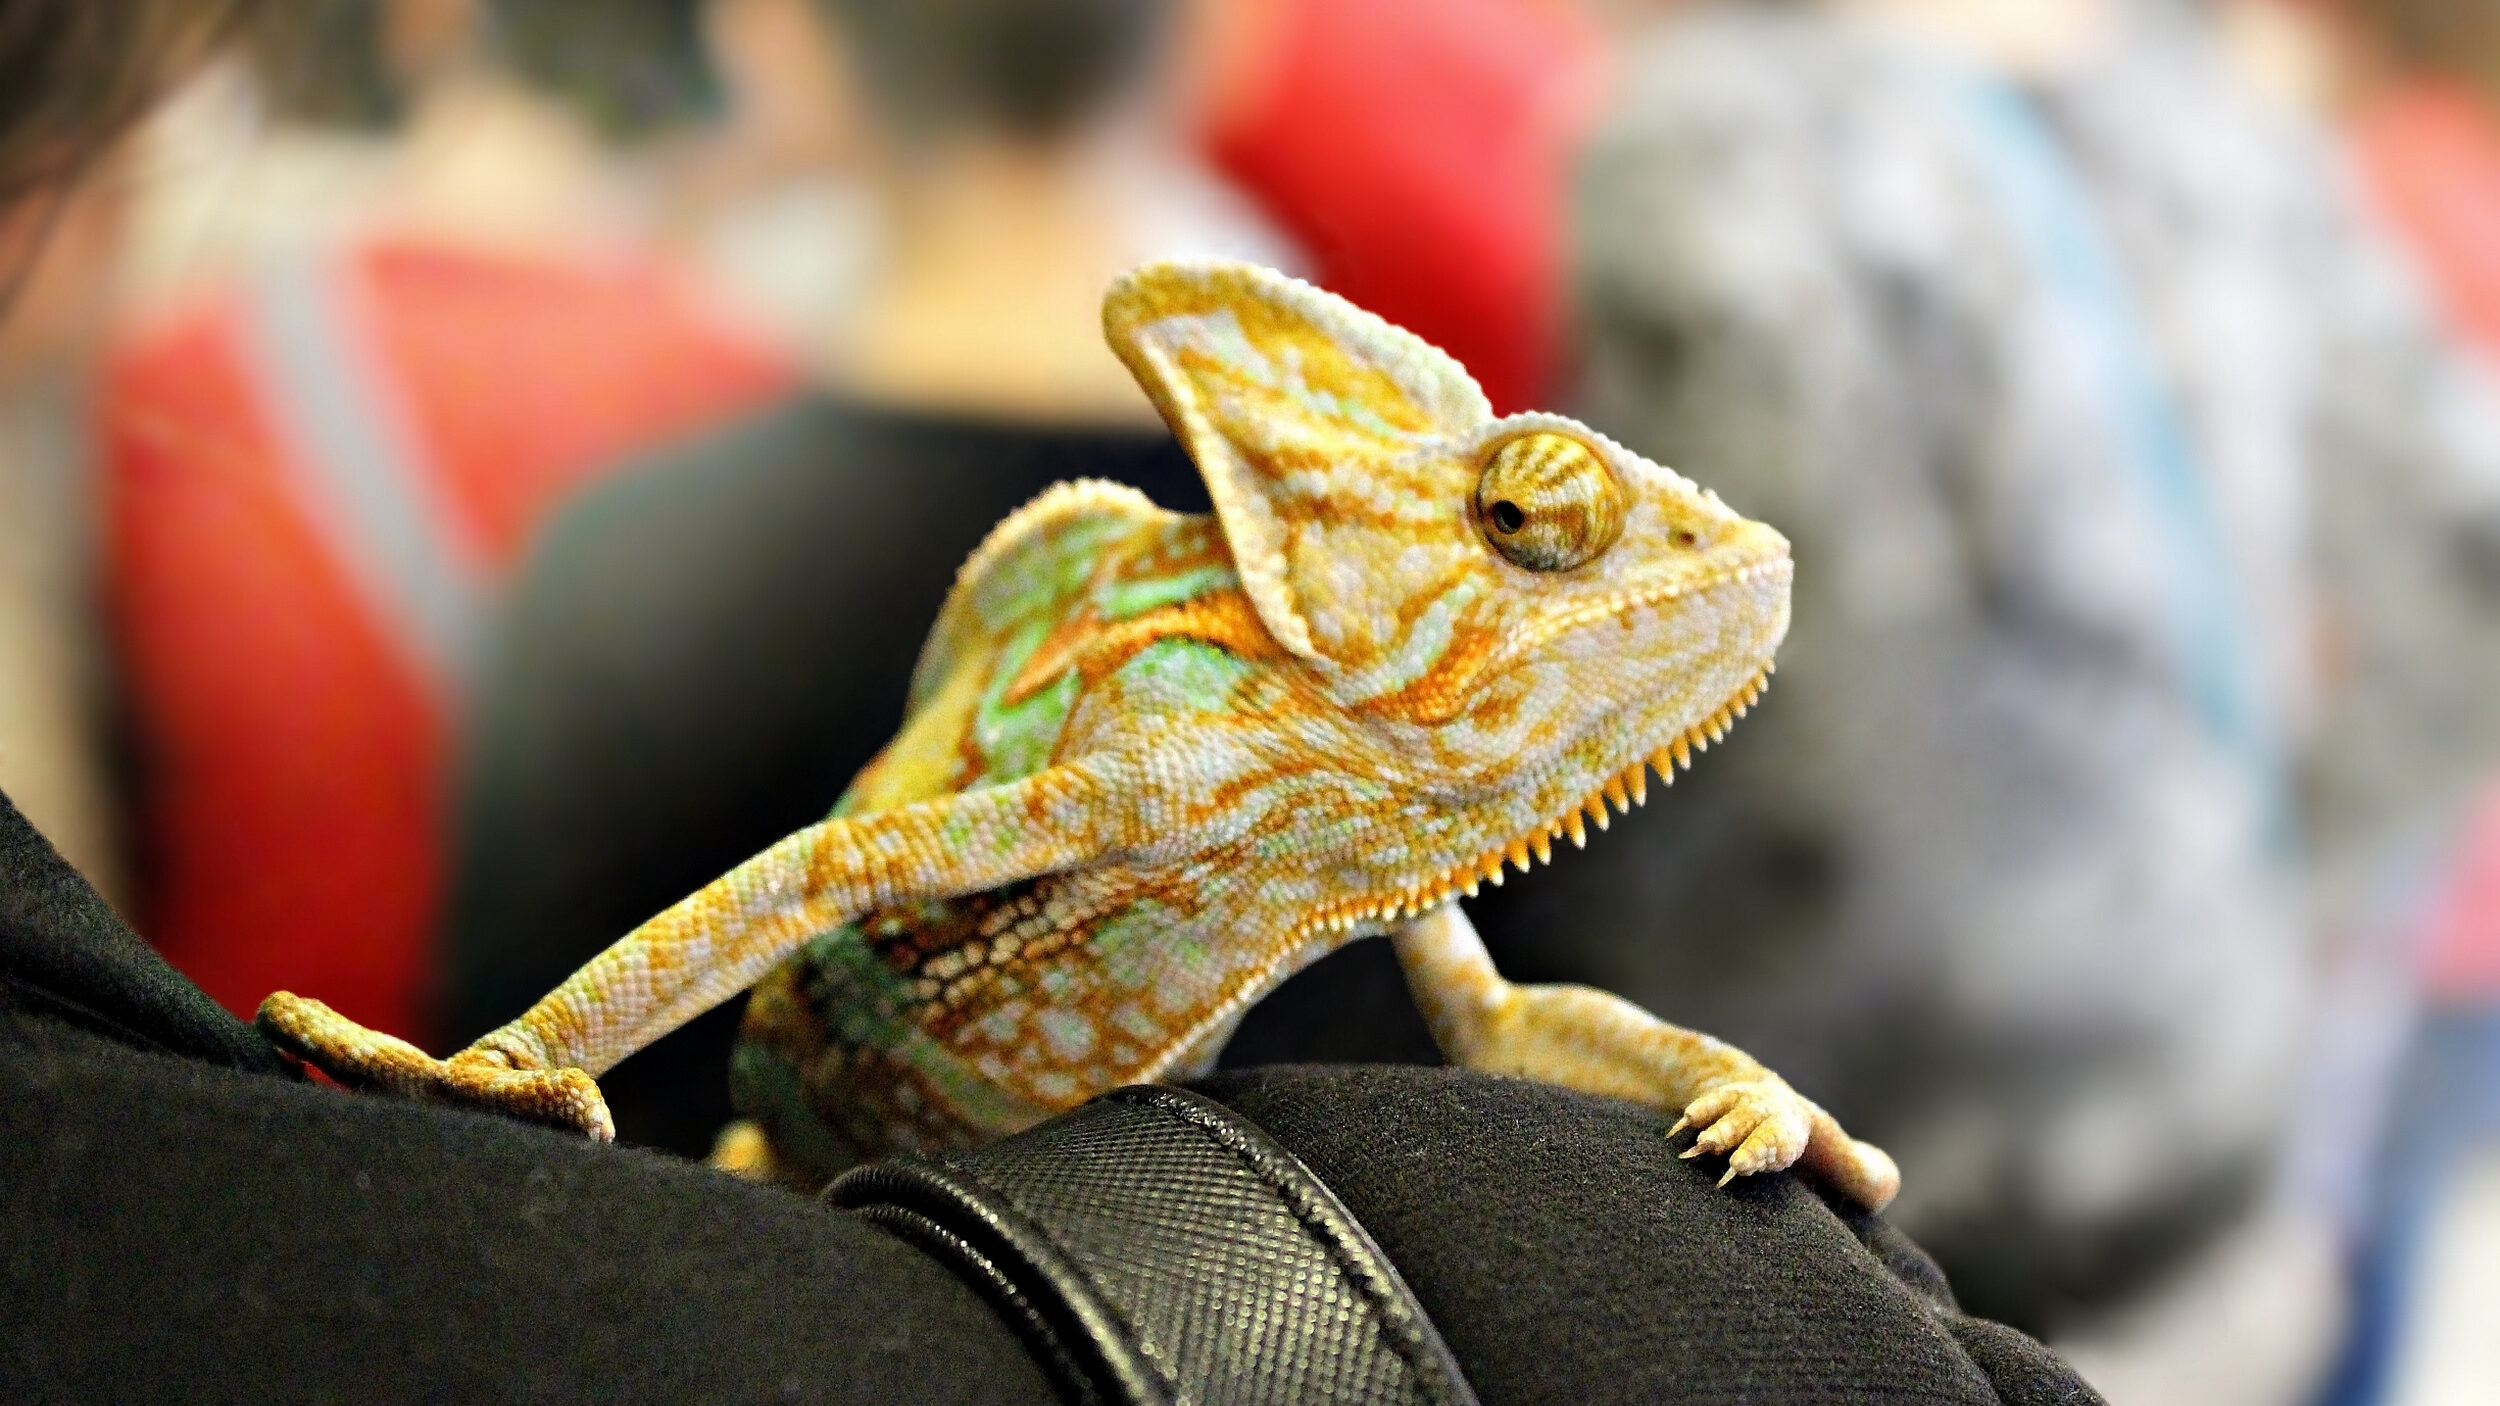 Your pet lizards are very smart - but are they smart enough to understand what you're saying and behave accordingly?